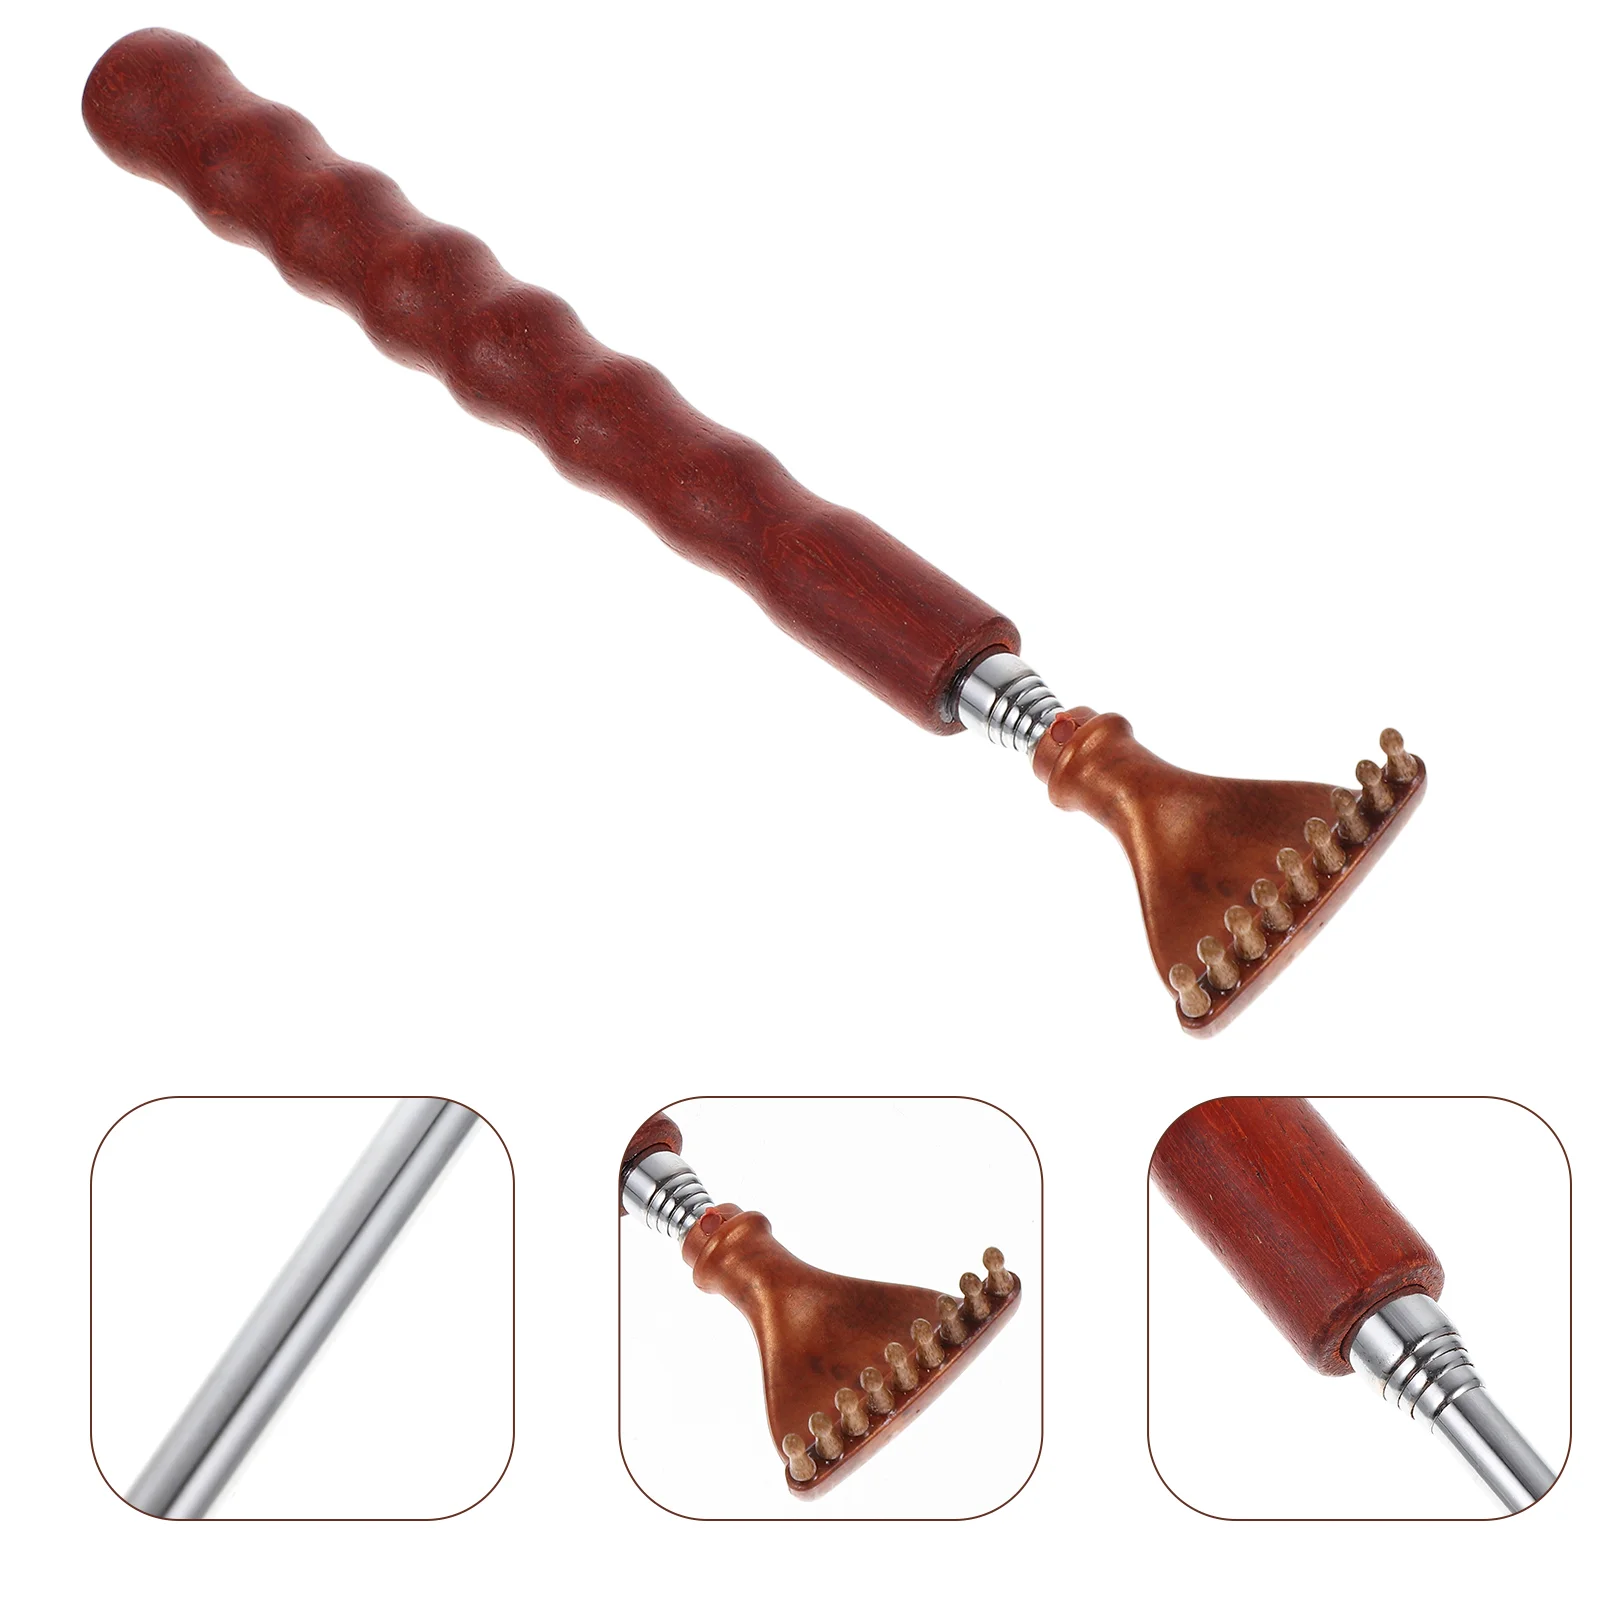 

Scratcher Claw Telescoping Handheld Tool Hand Portable Wooden Scratchers Stick Scratching Personalized Scraper Itching Gift Good